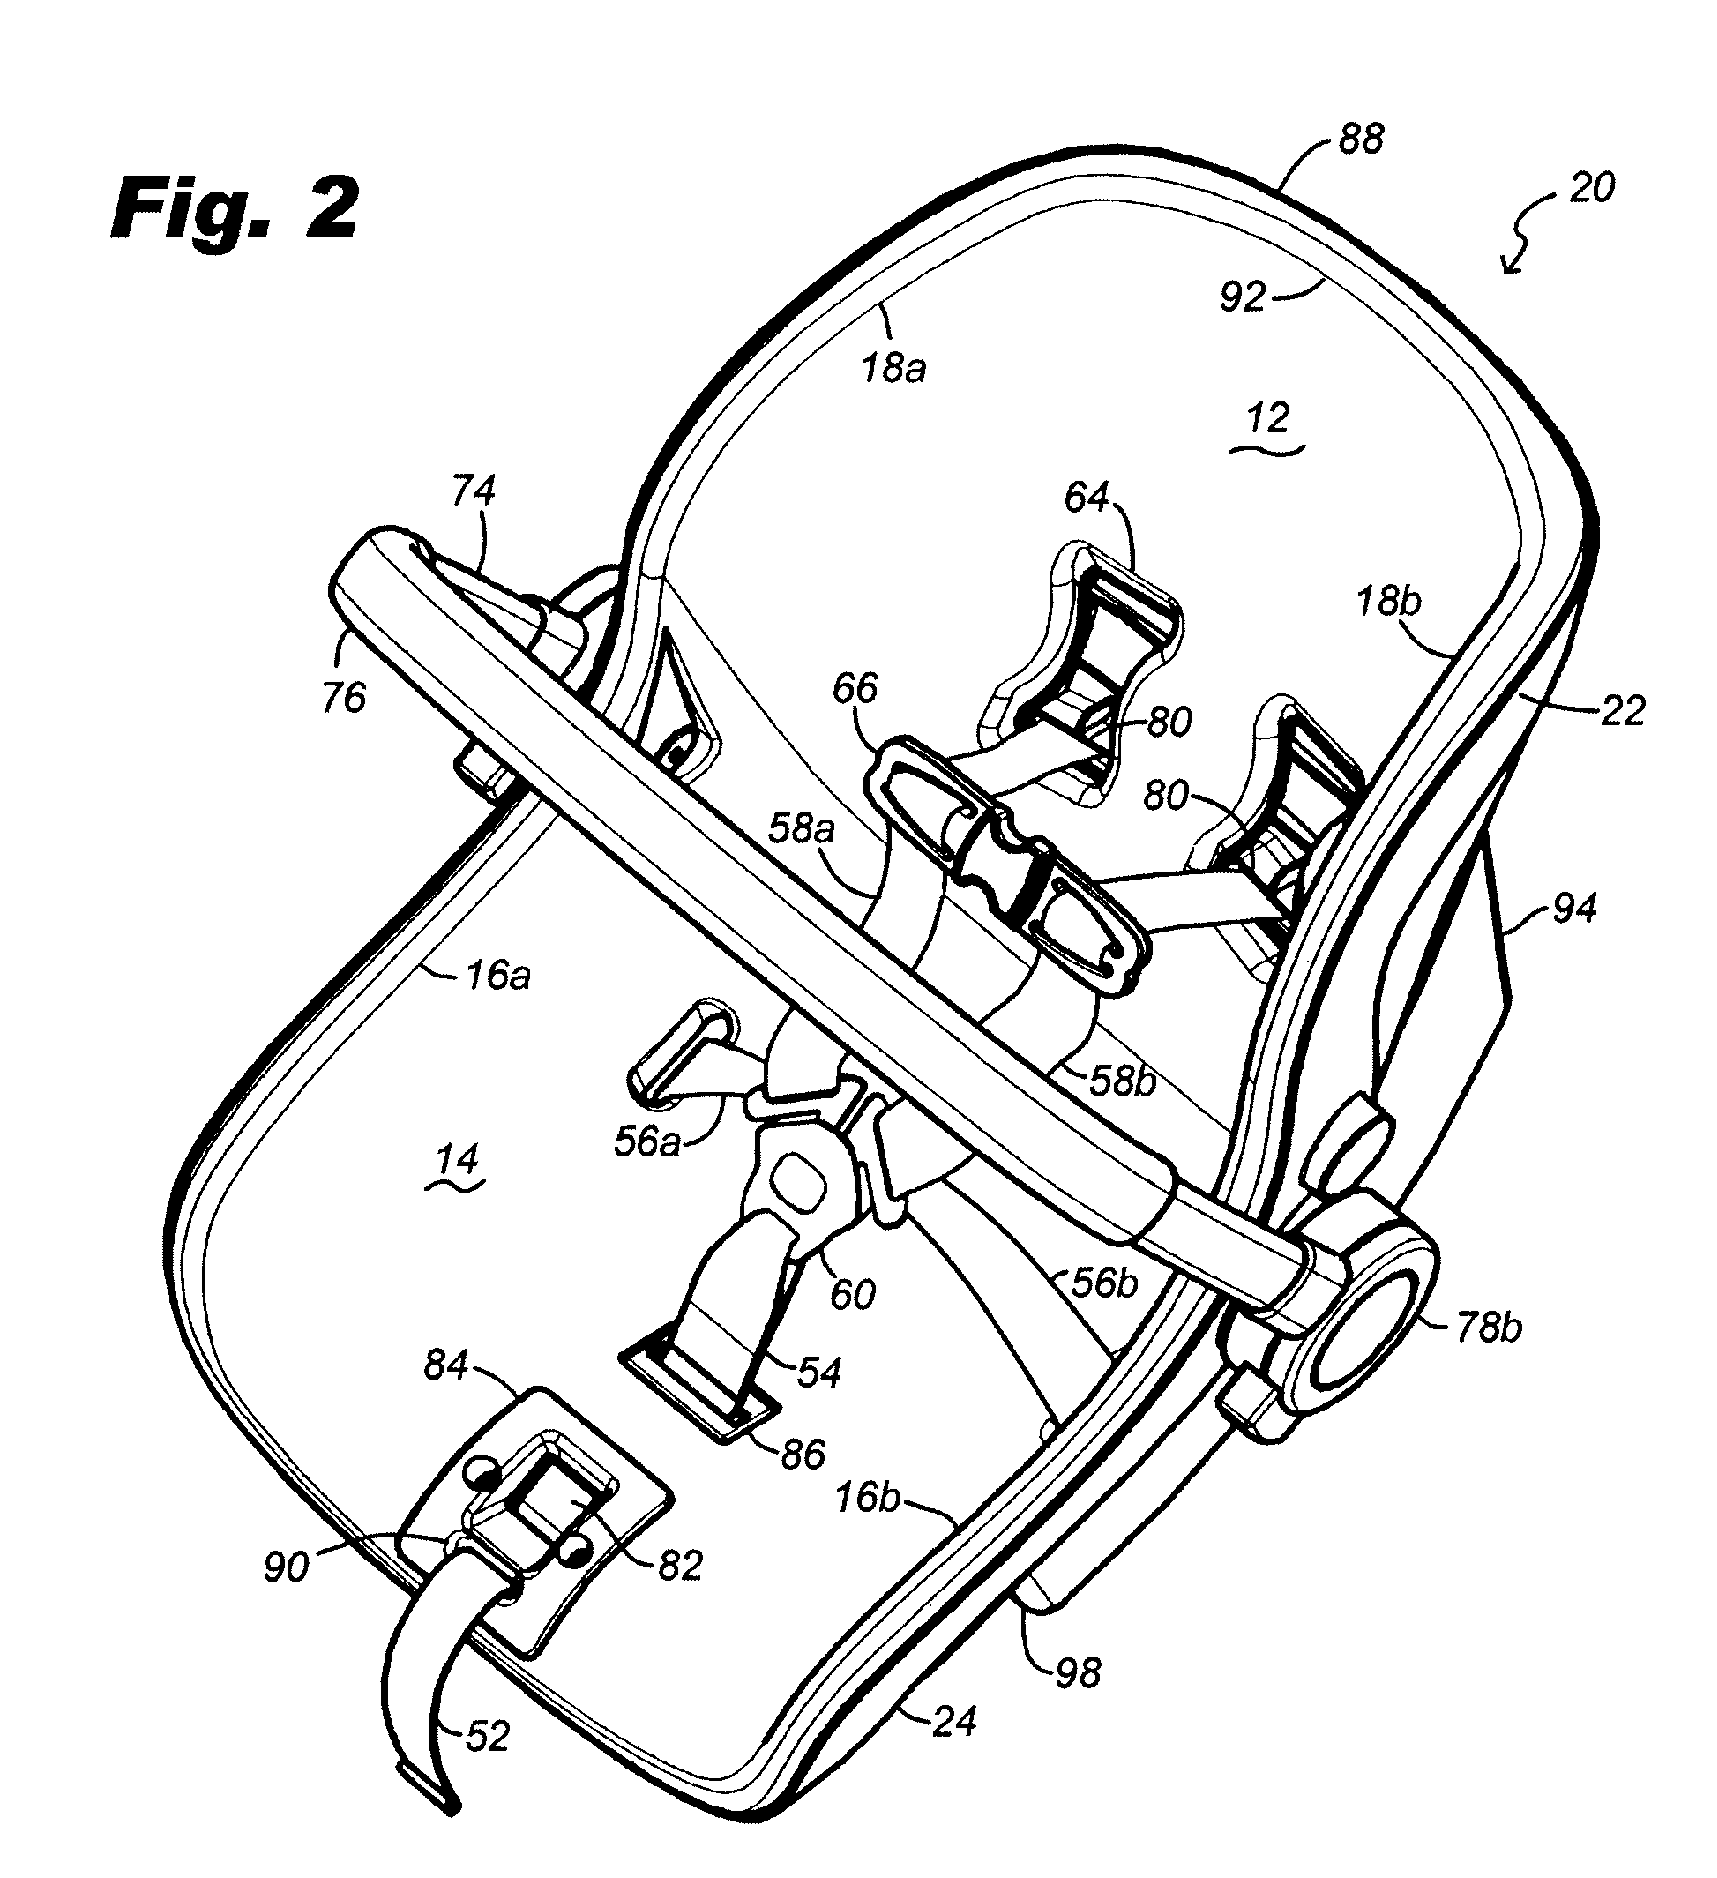 Infant carrier and receiving base